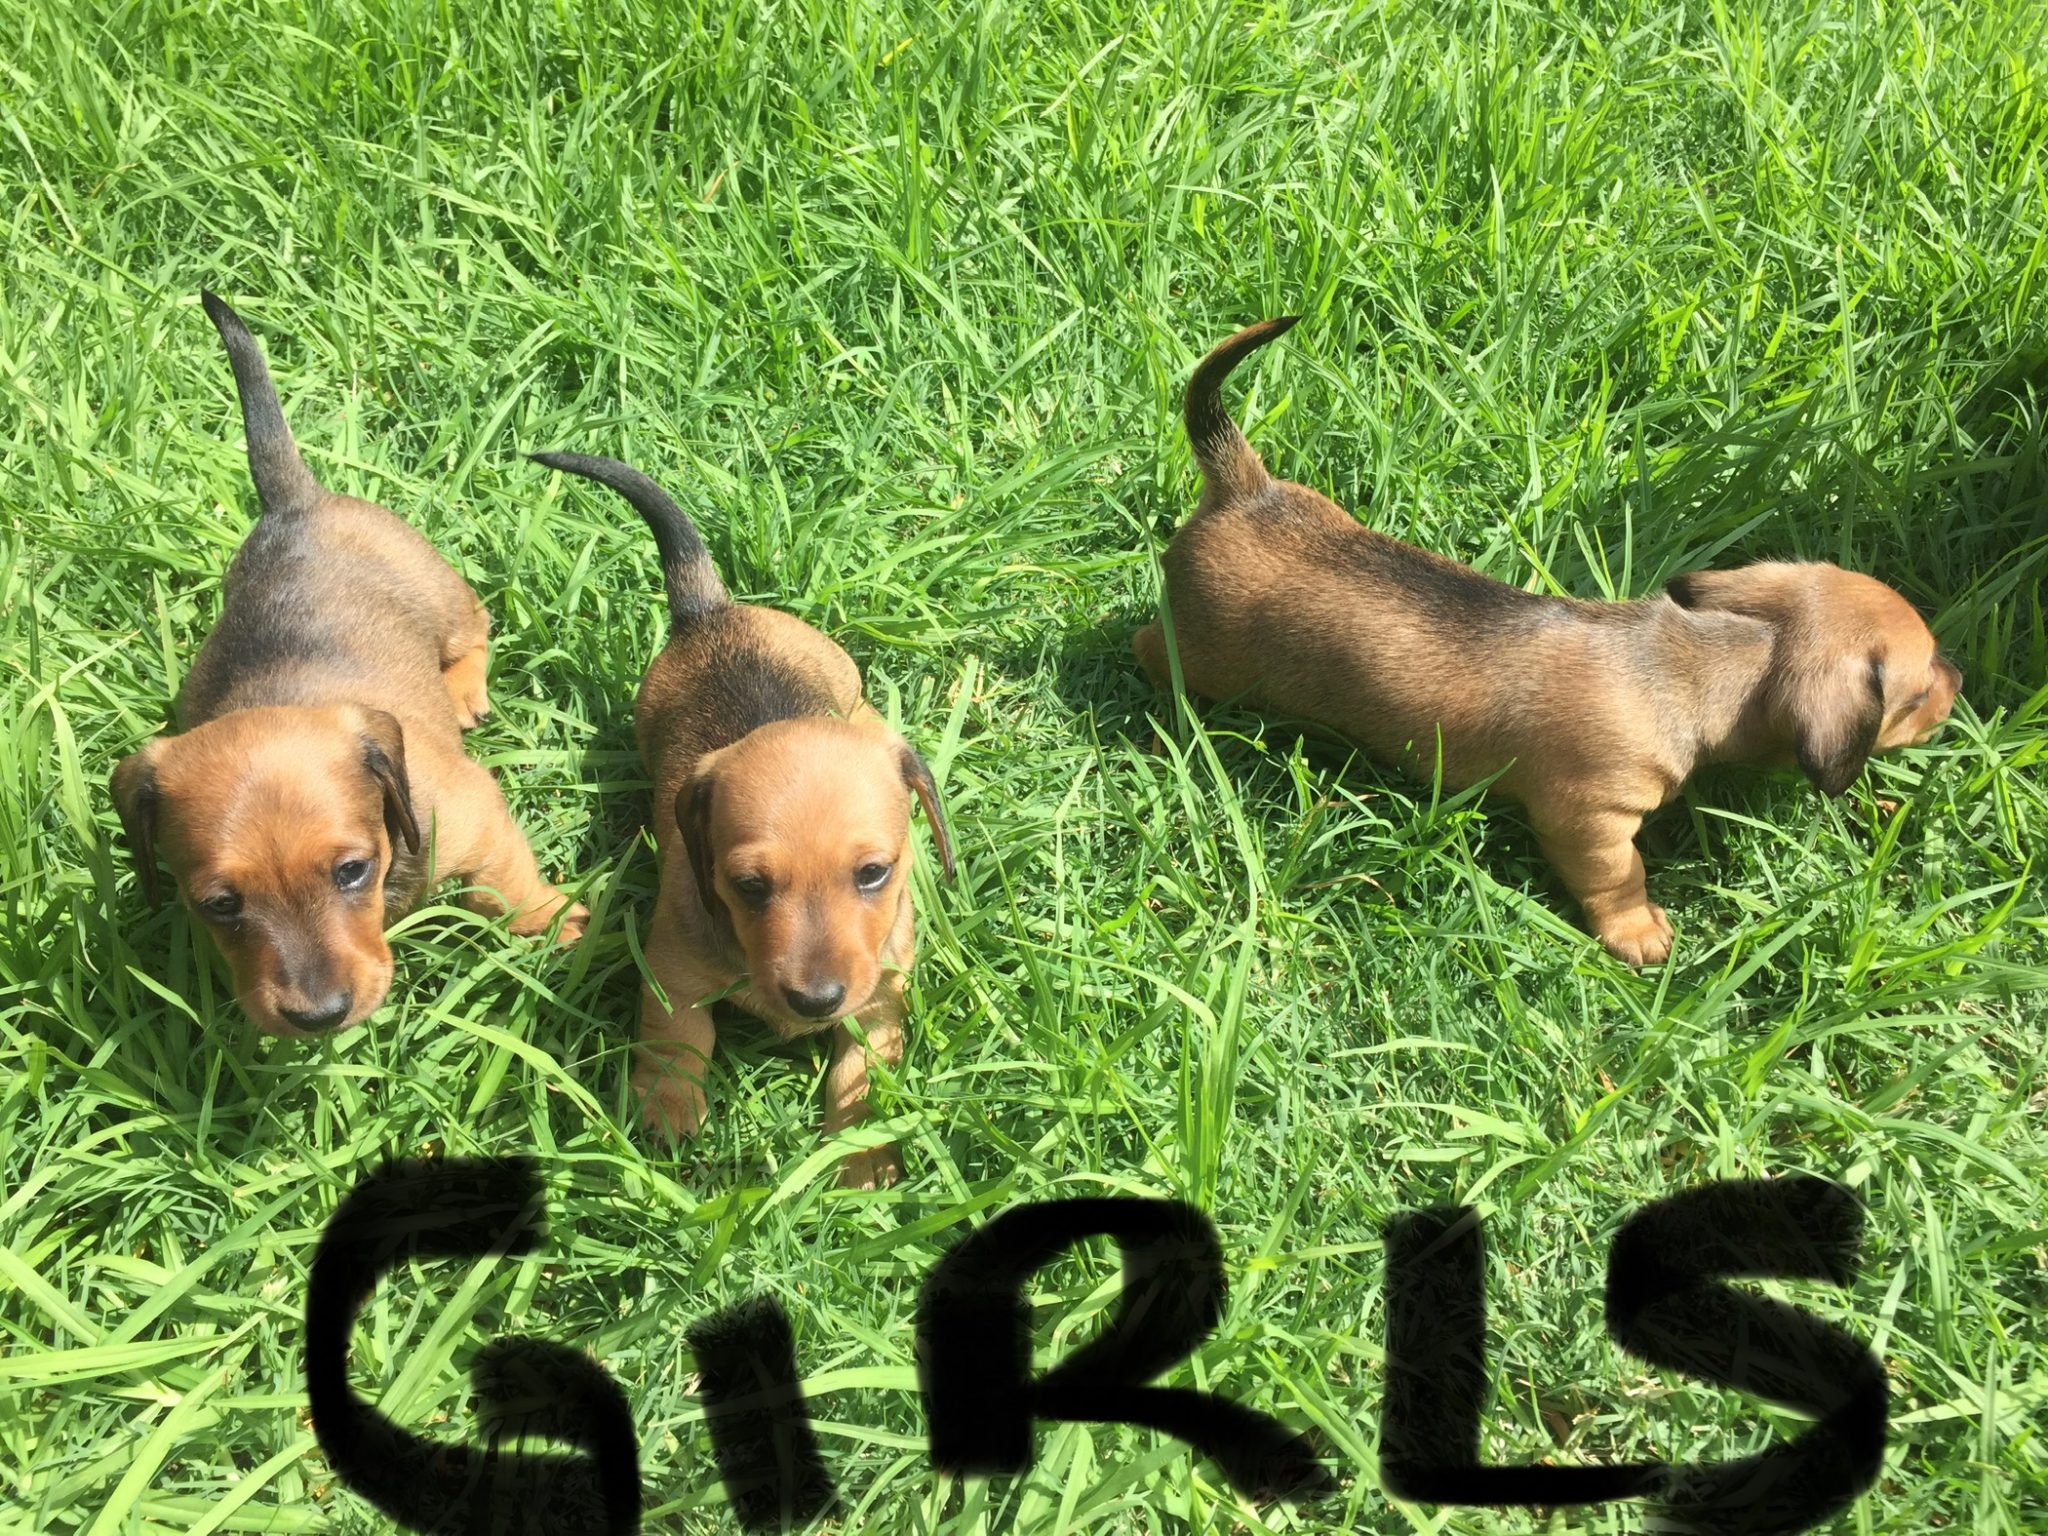 Purebred Miniature smooth haired dachshund puppies